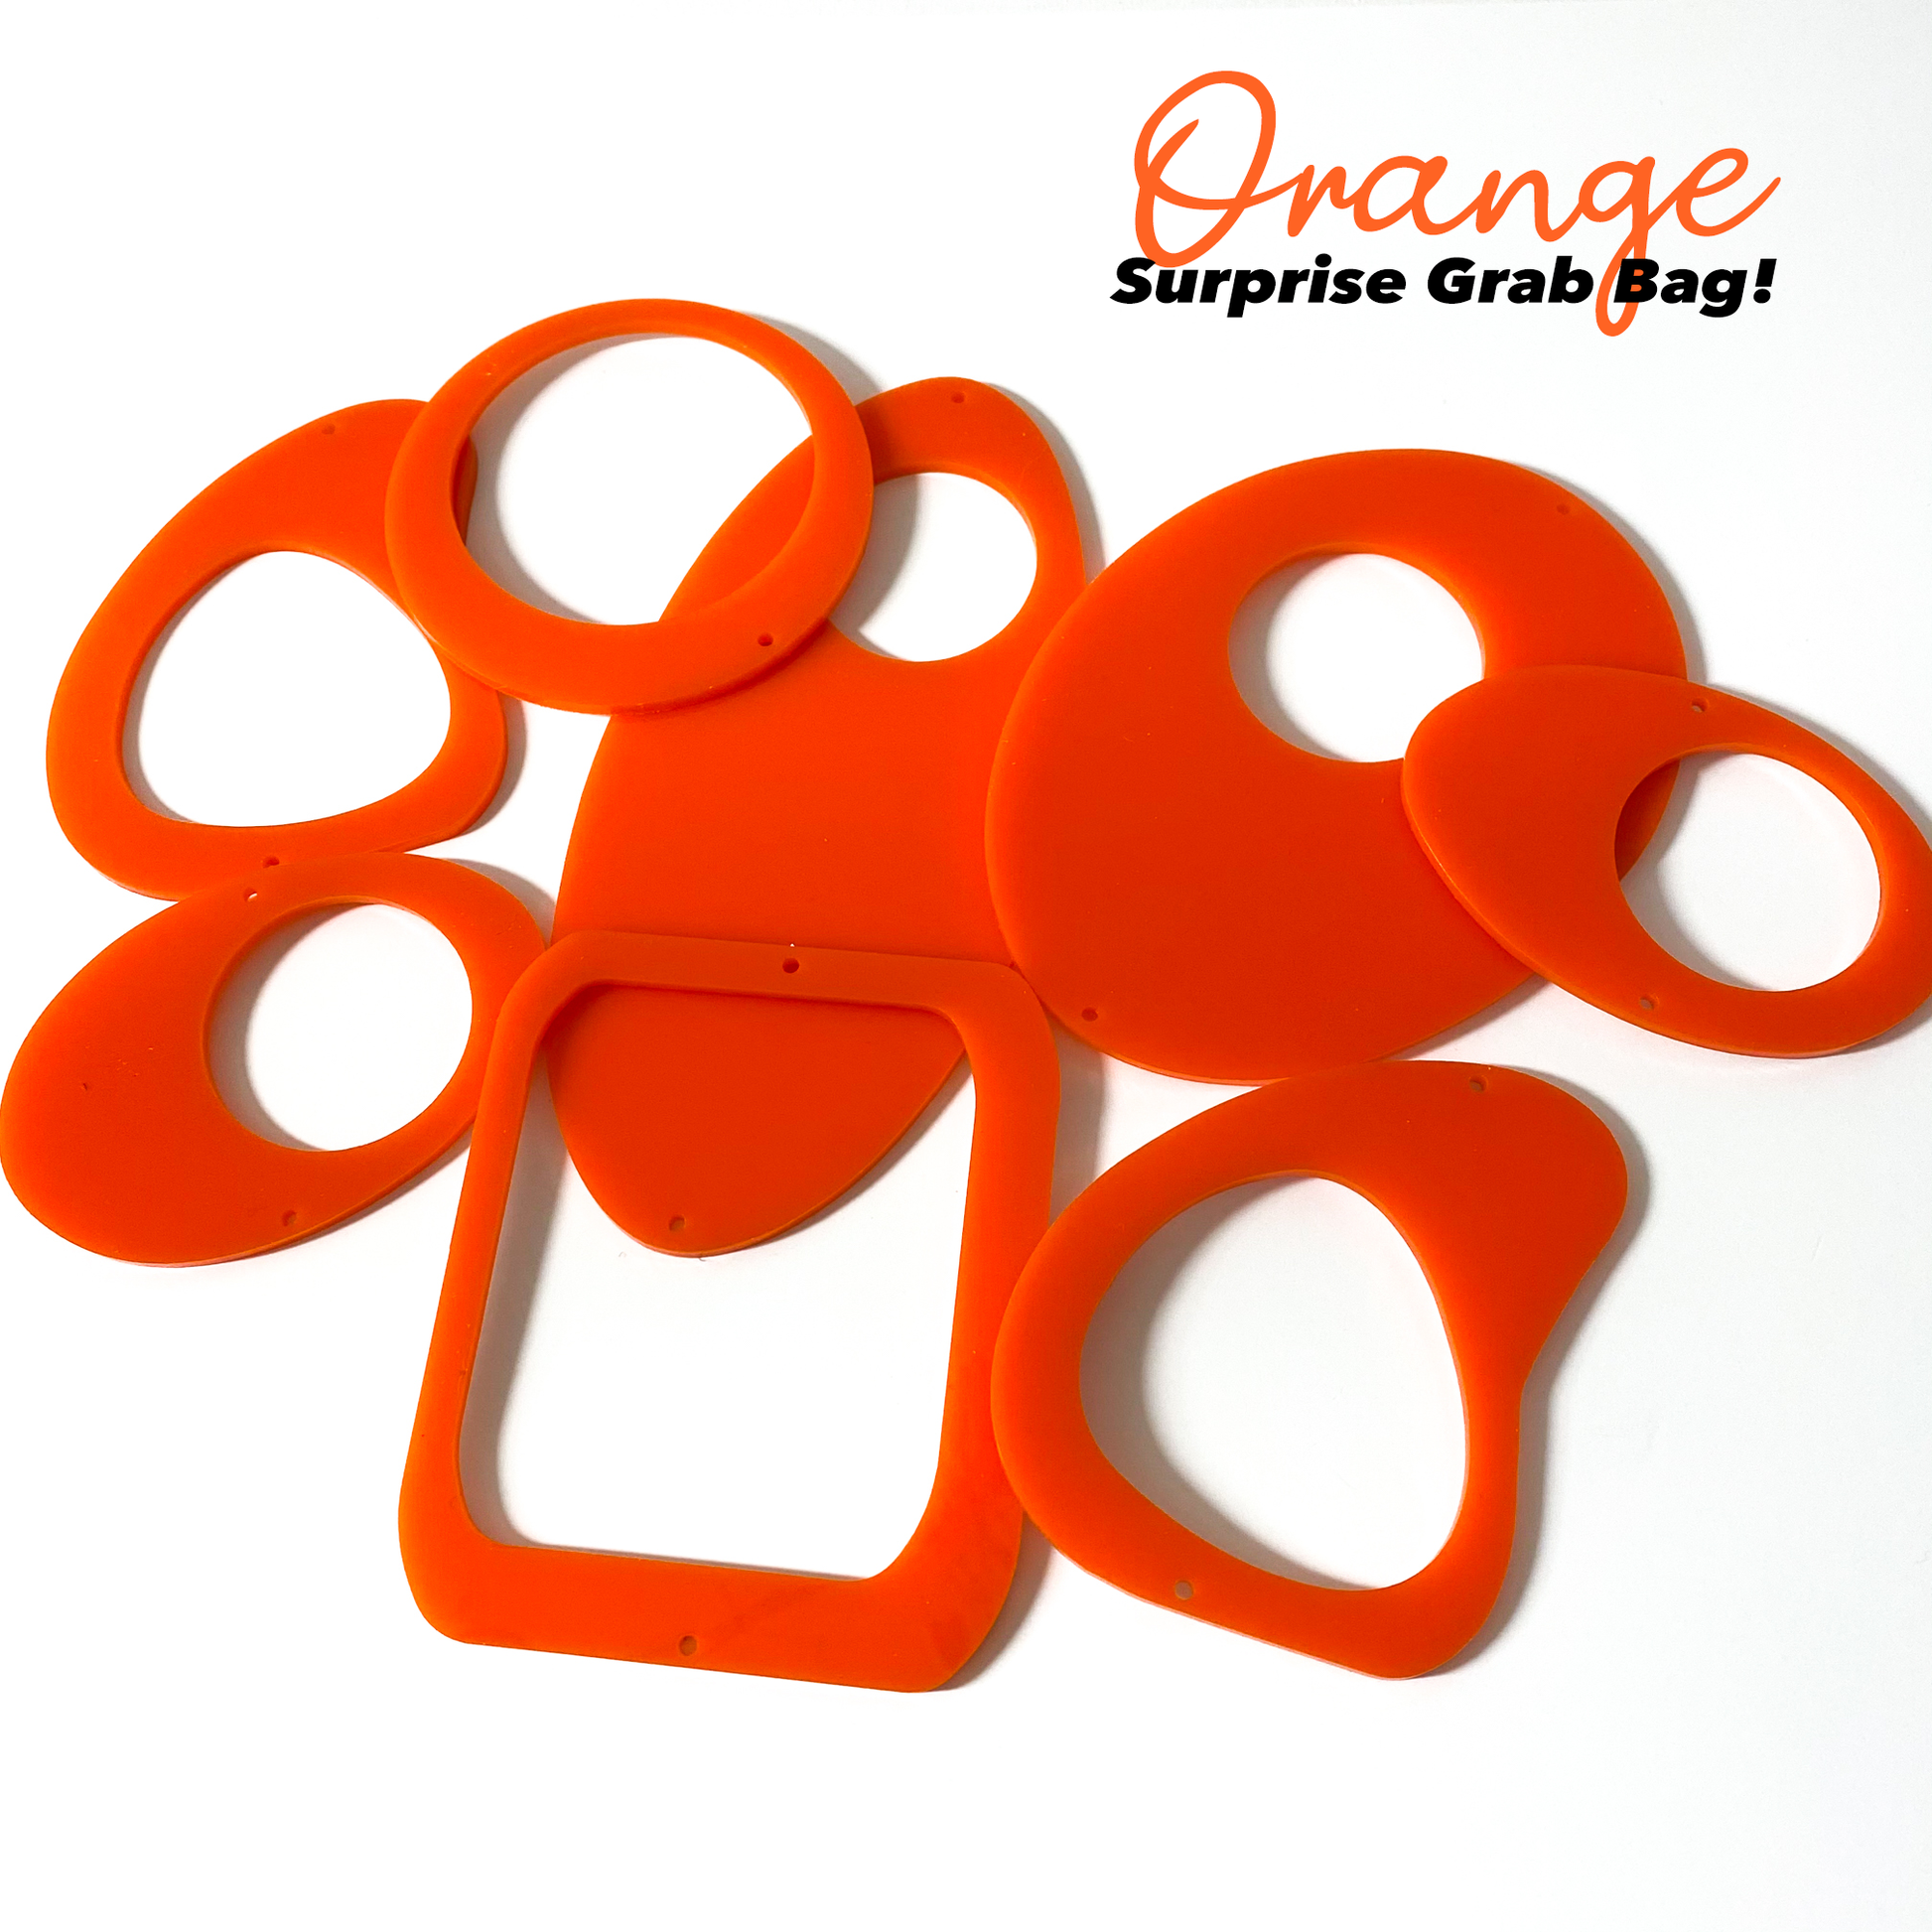 Orange Surprise Grab Bag of mid century modern inspired parts to make a hanging art mobile - DIY Kits by AtomicMobiles.com